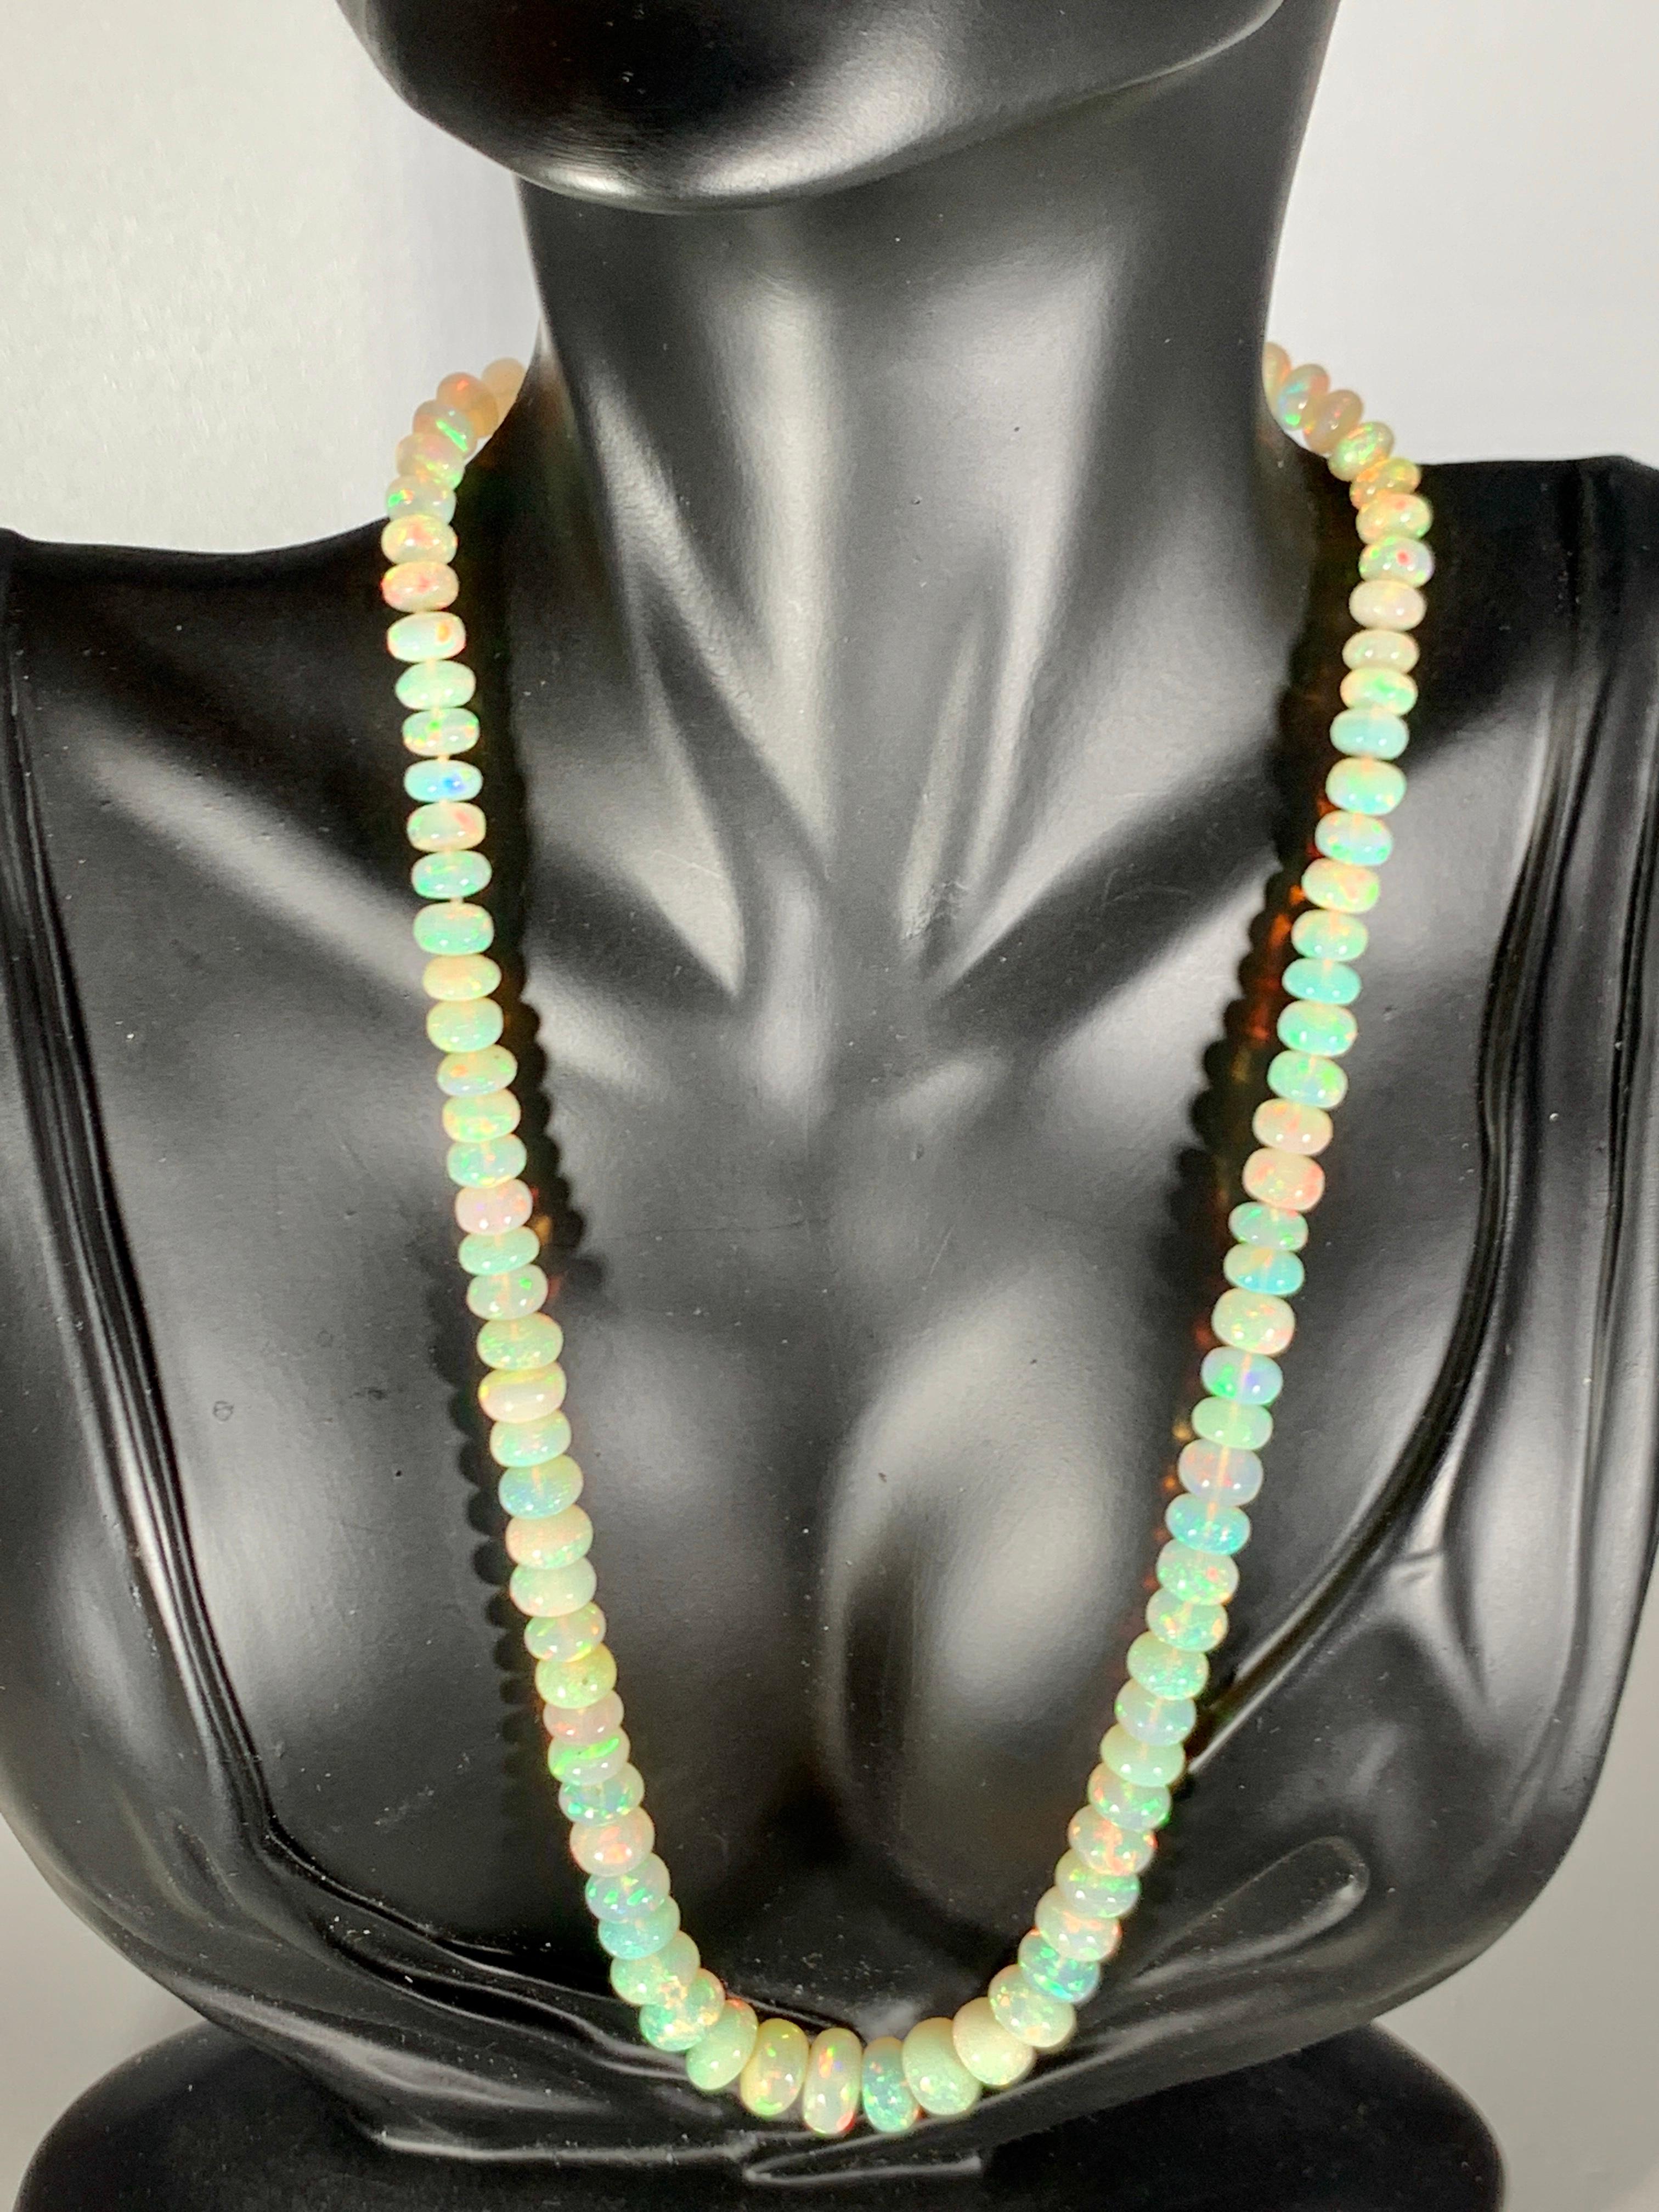  Natural Opal single strand Bead Necklace with 14 Karat gold Clasp. These are Ethiopian Beads
16